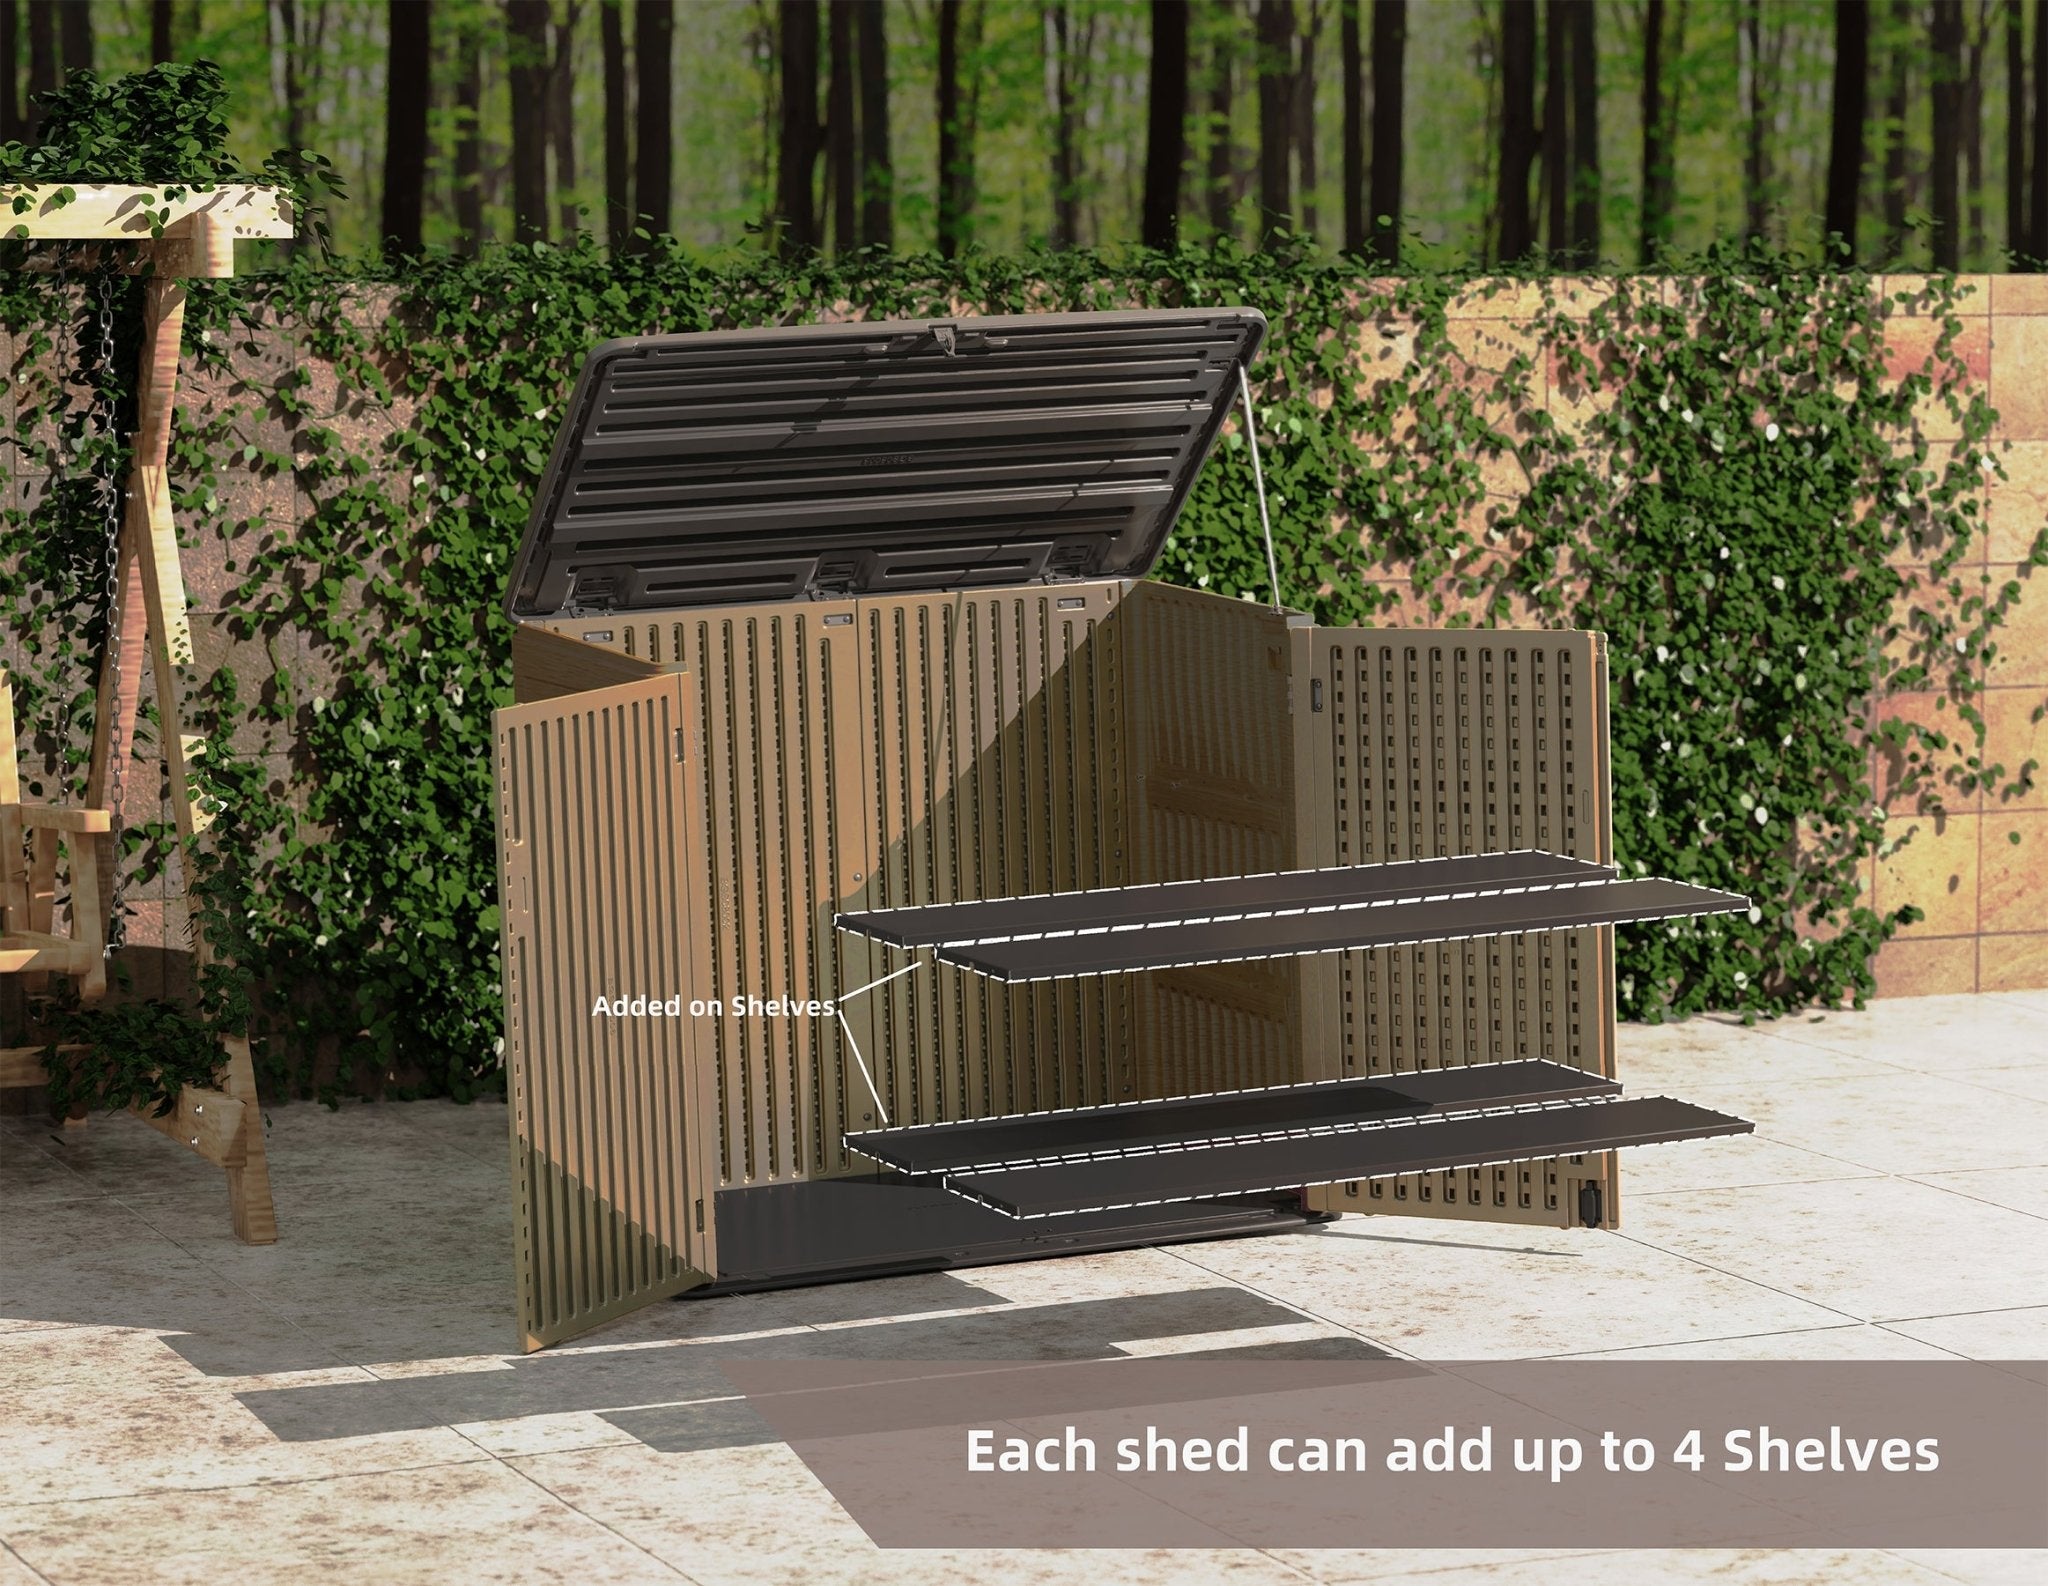 Horti Cubic 38 cu. ft. Outdoor Horizontal Storage Shed - Horti Cubic